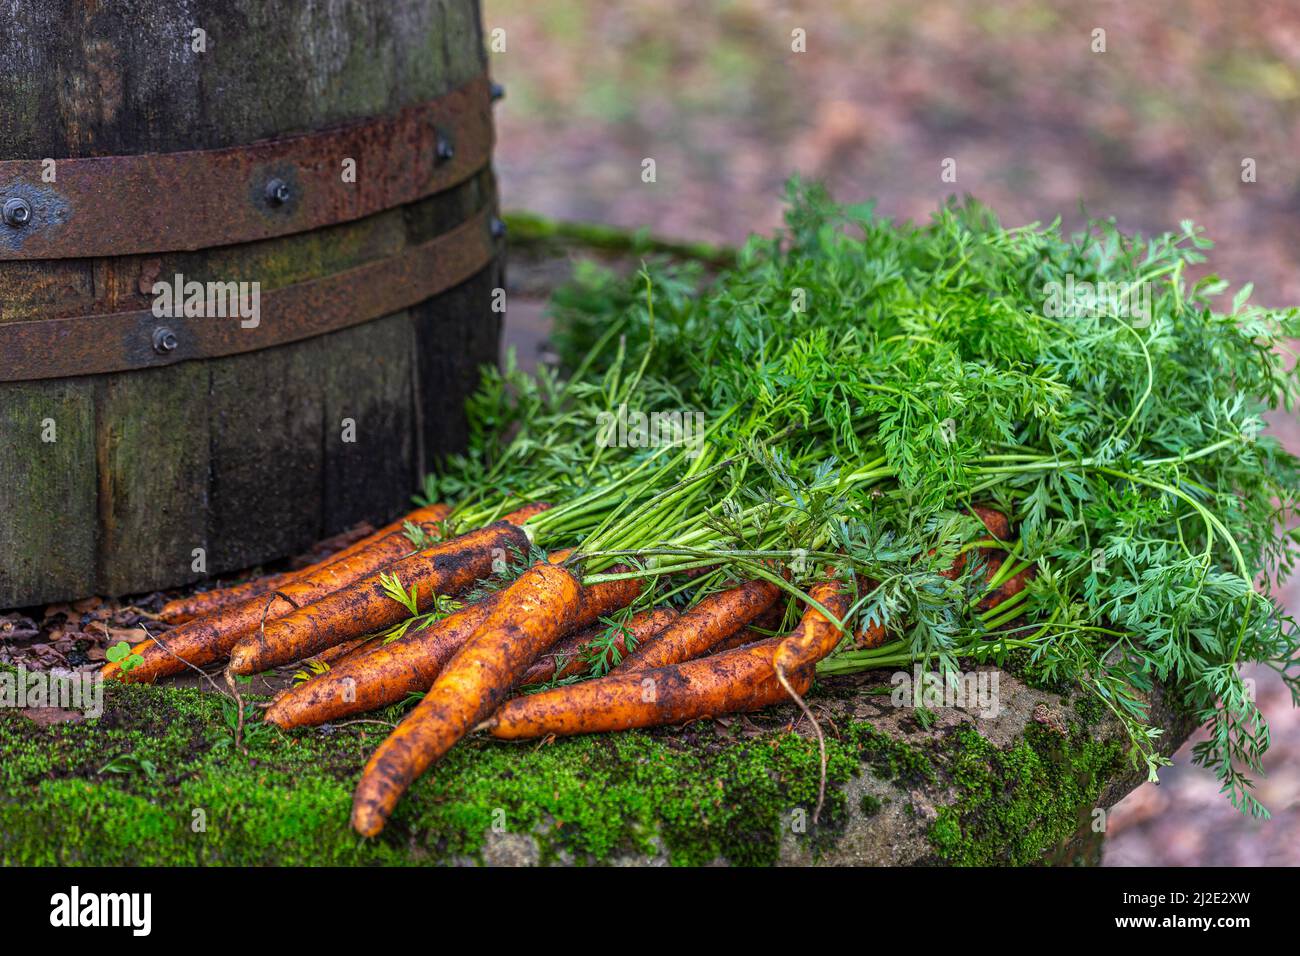 Bunch of carrots Stock Photo